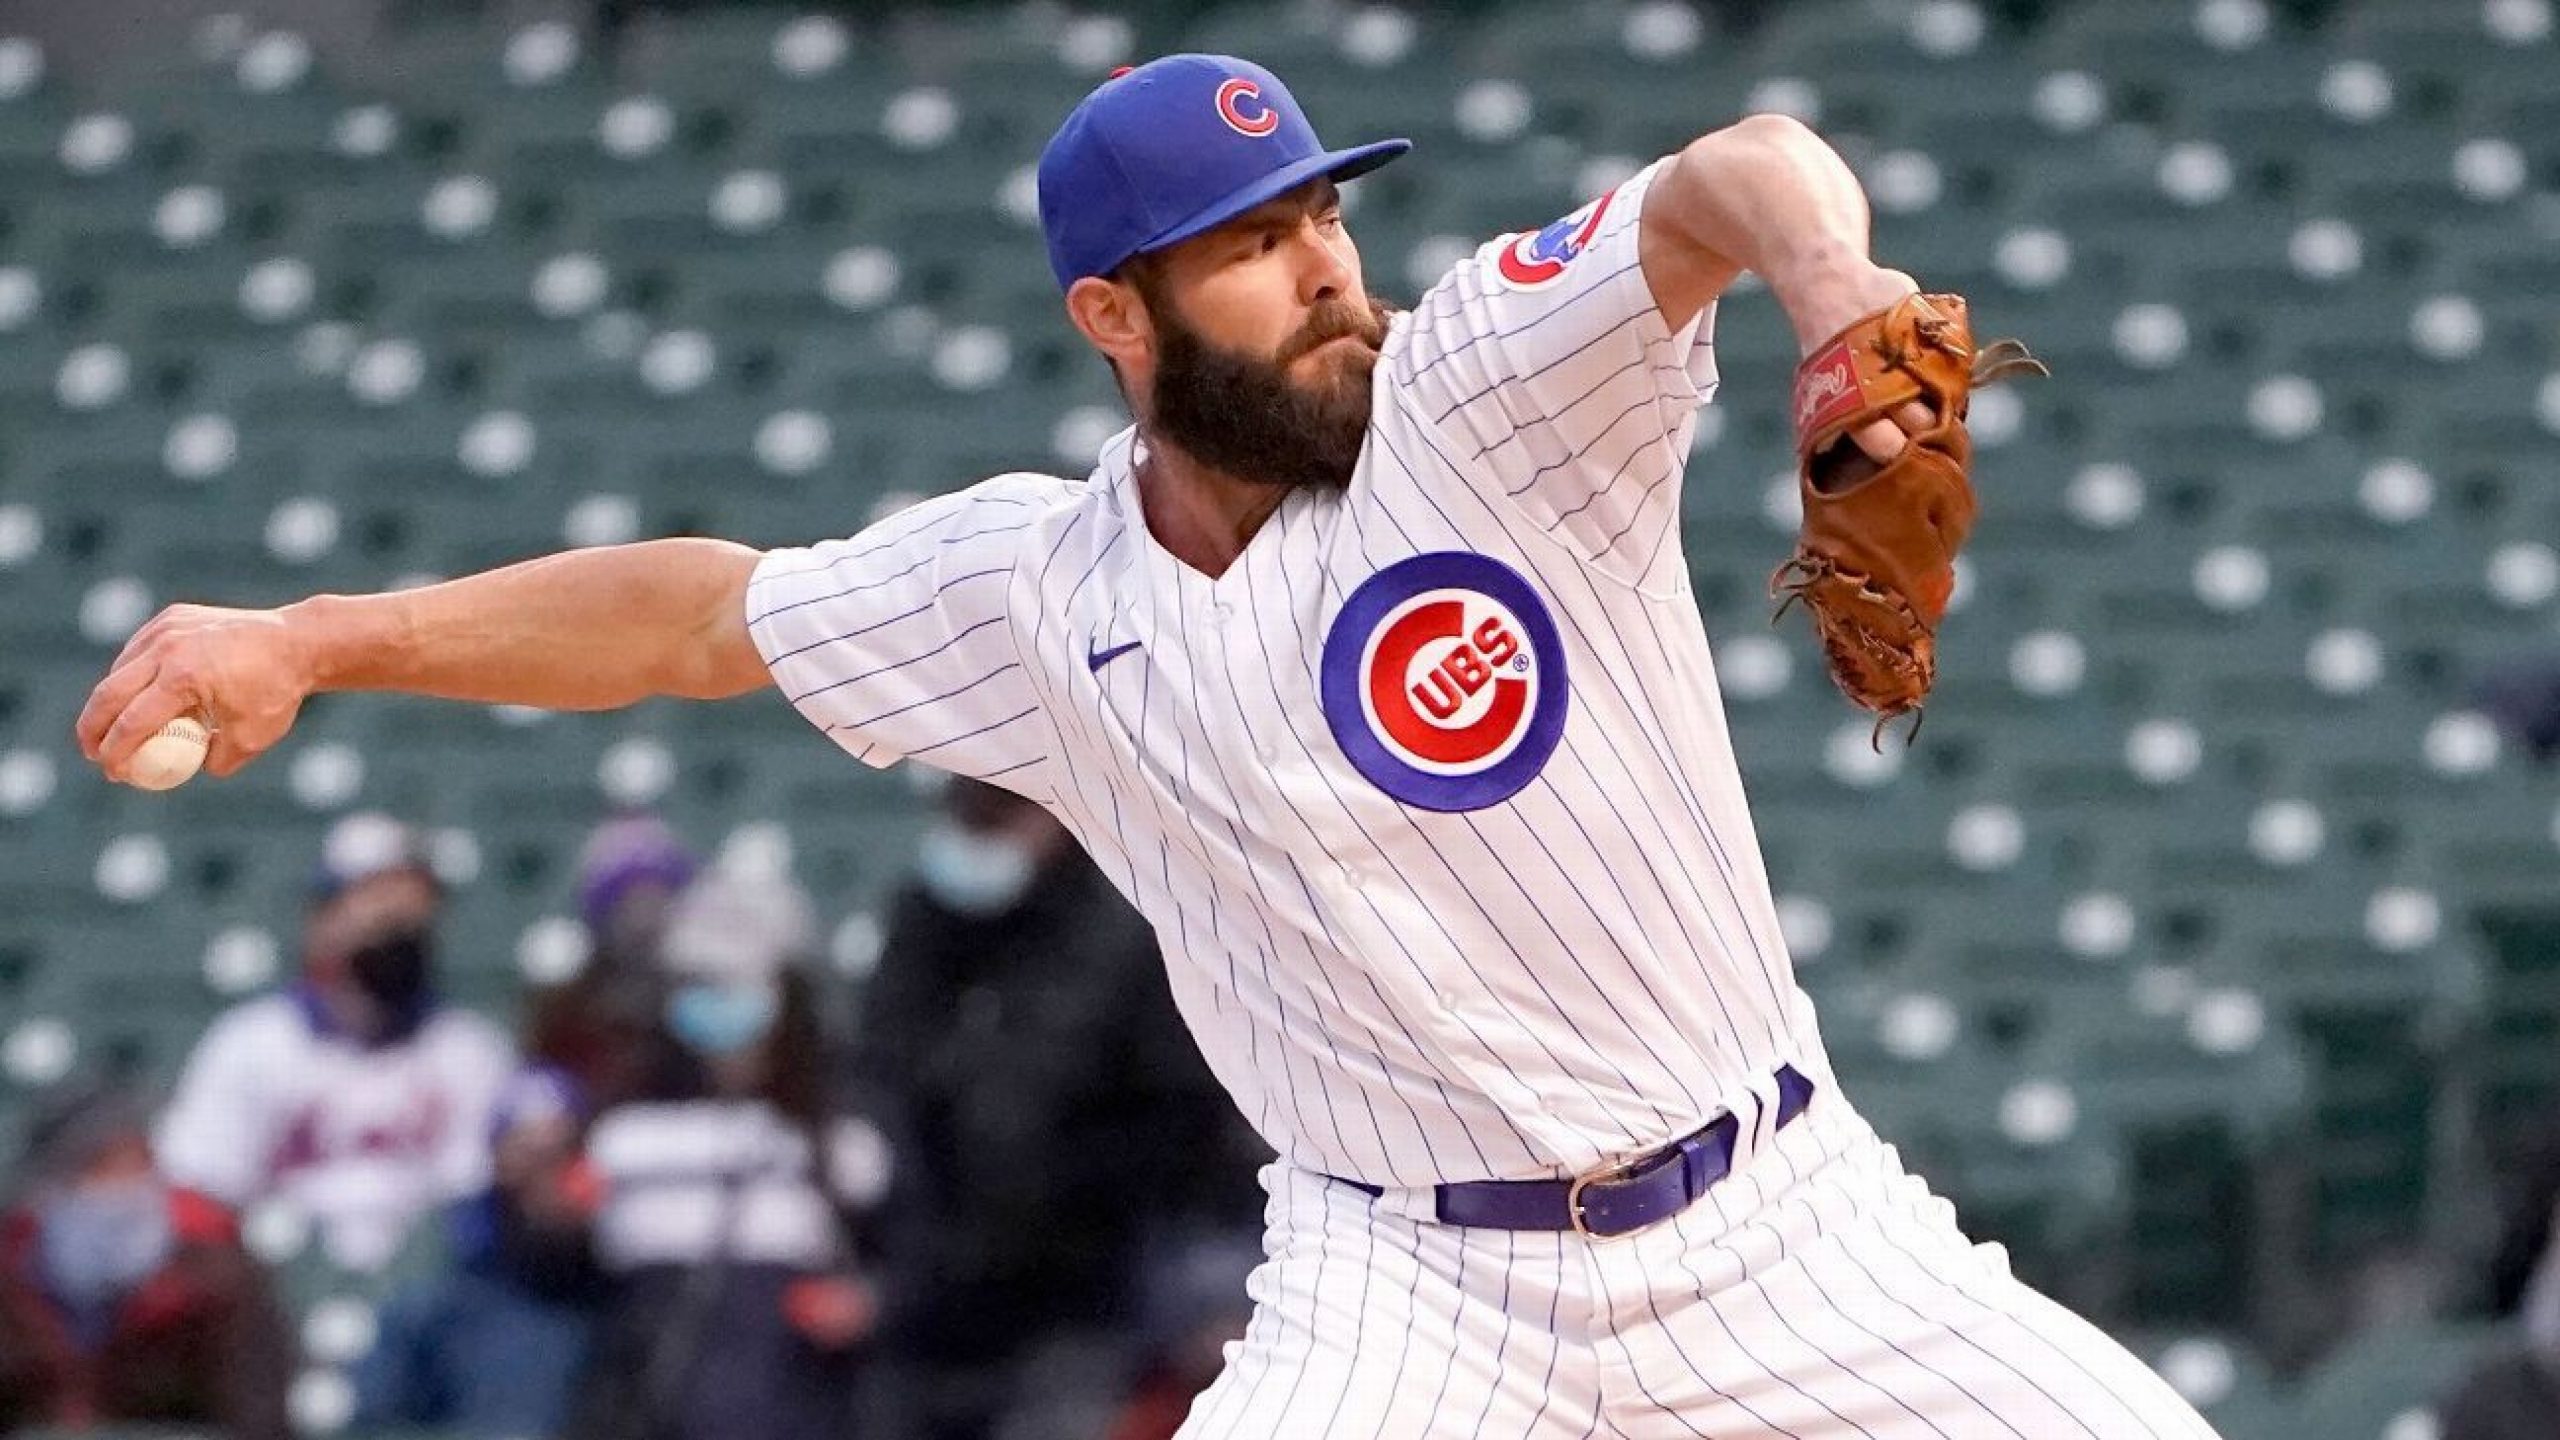 Cubs’ Arrieta: ‘Not even close’ to being done